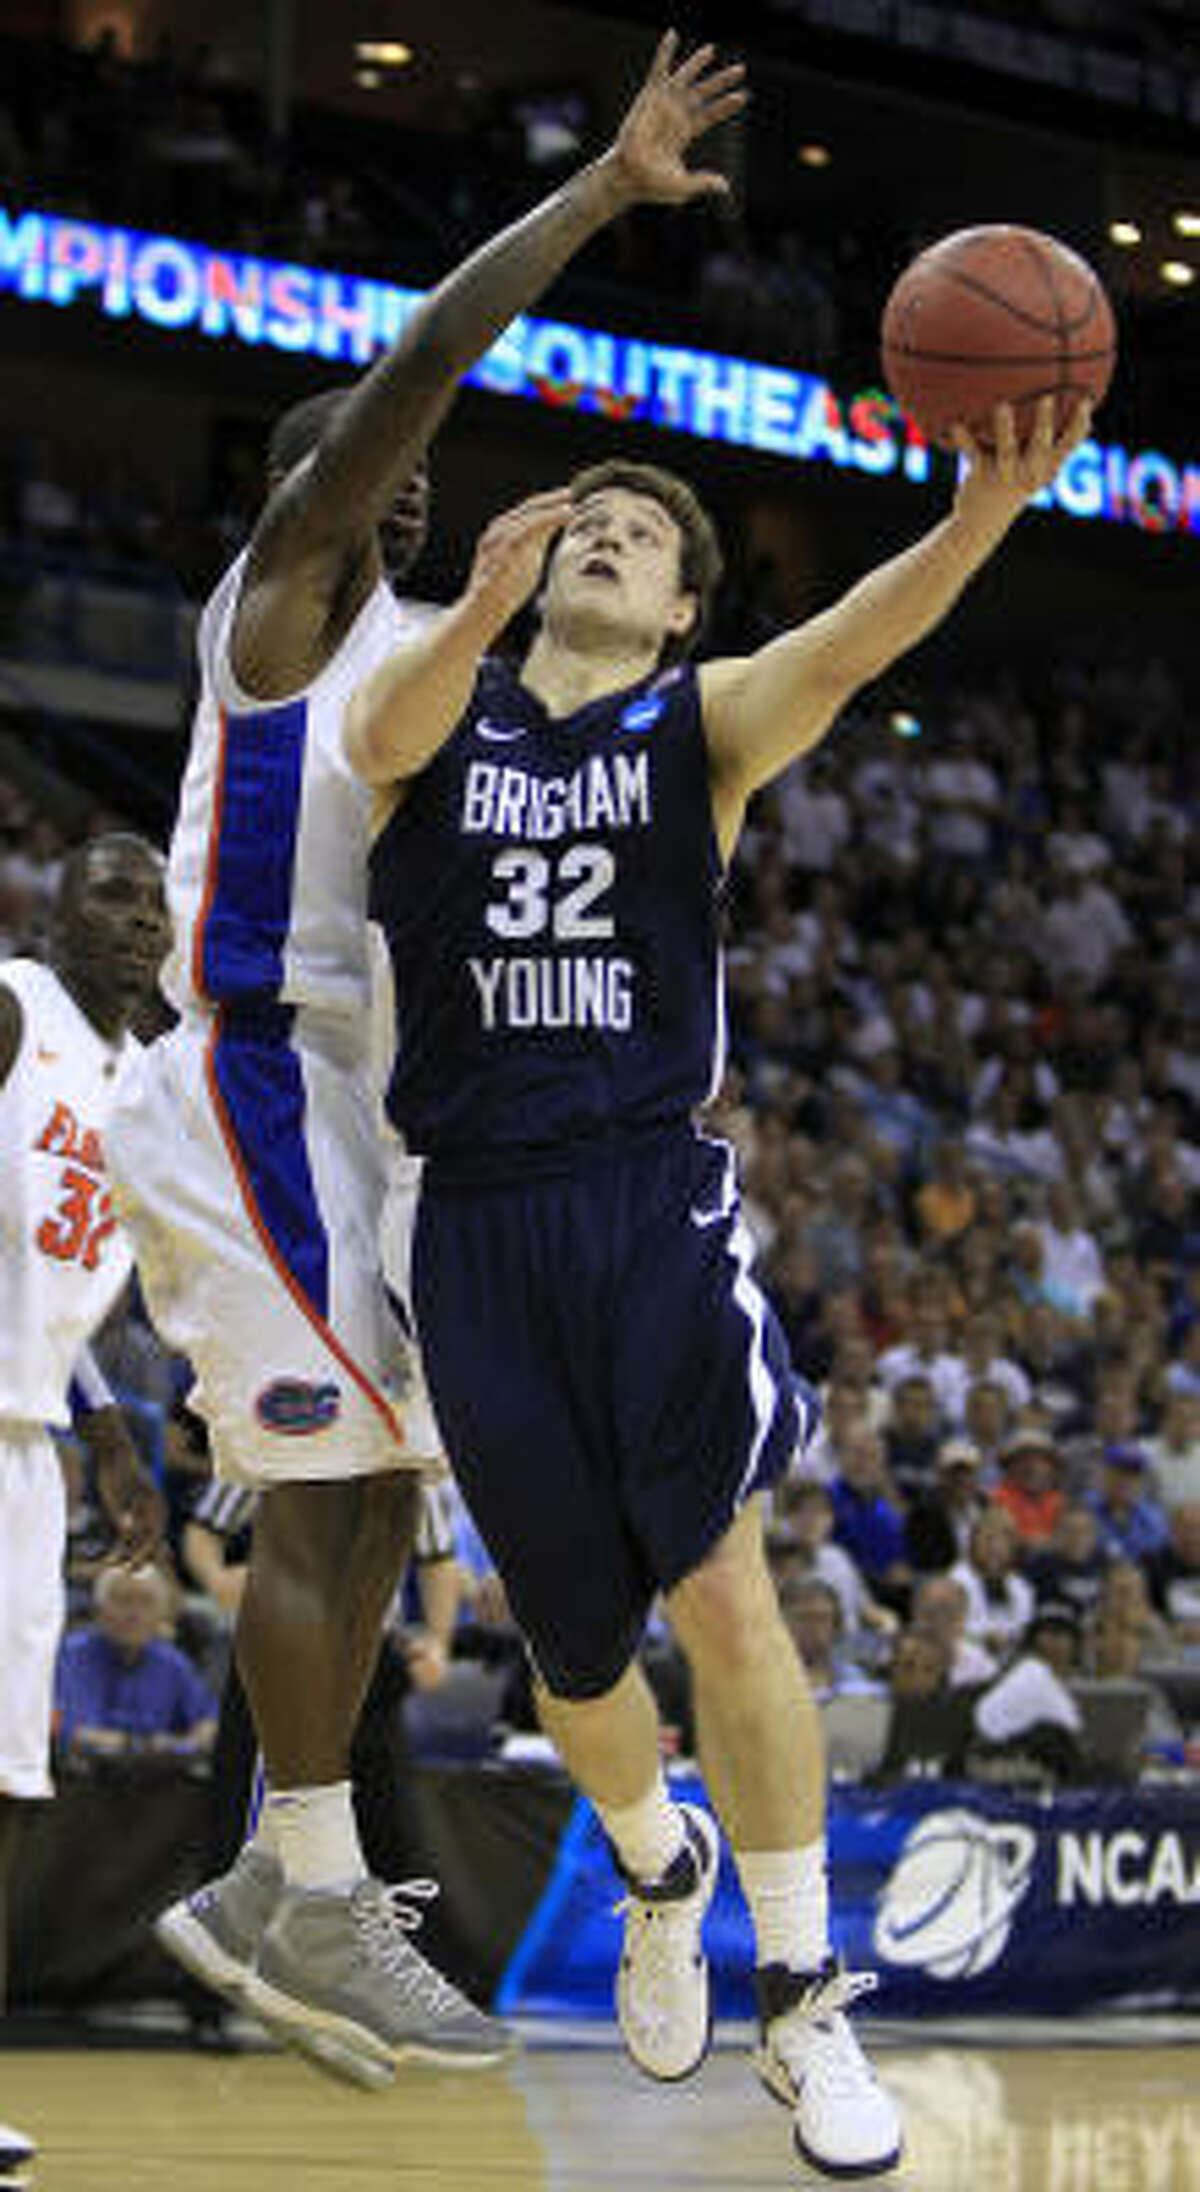 Jimmer Fredette may be one of the players available at No. 14 if the Rockets retain the pick.